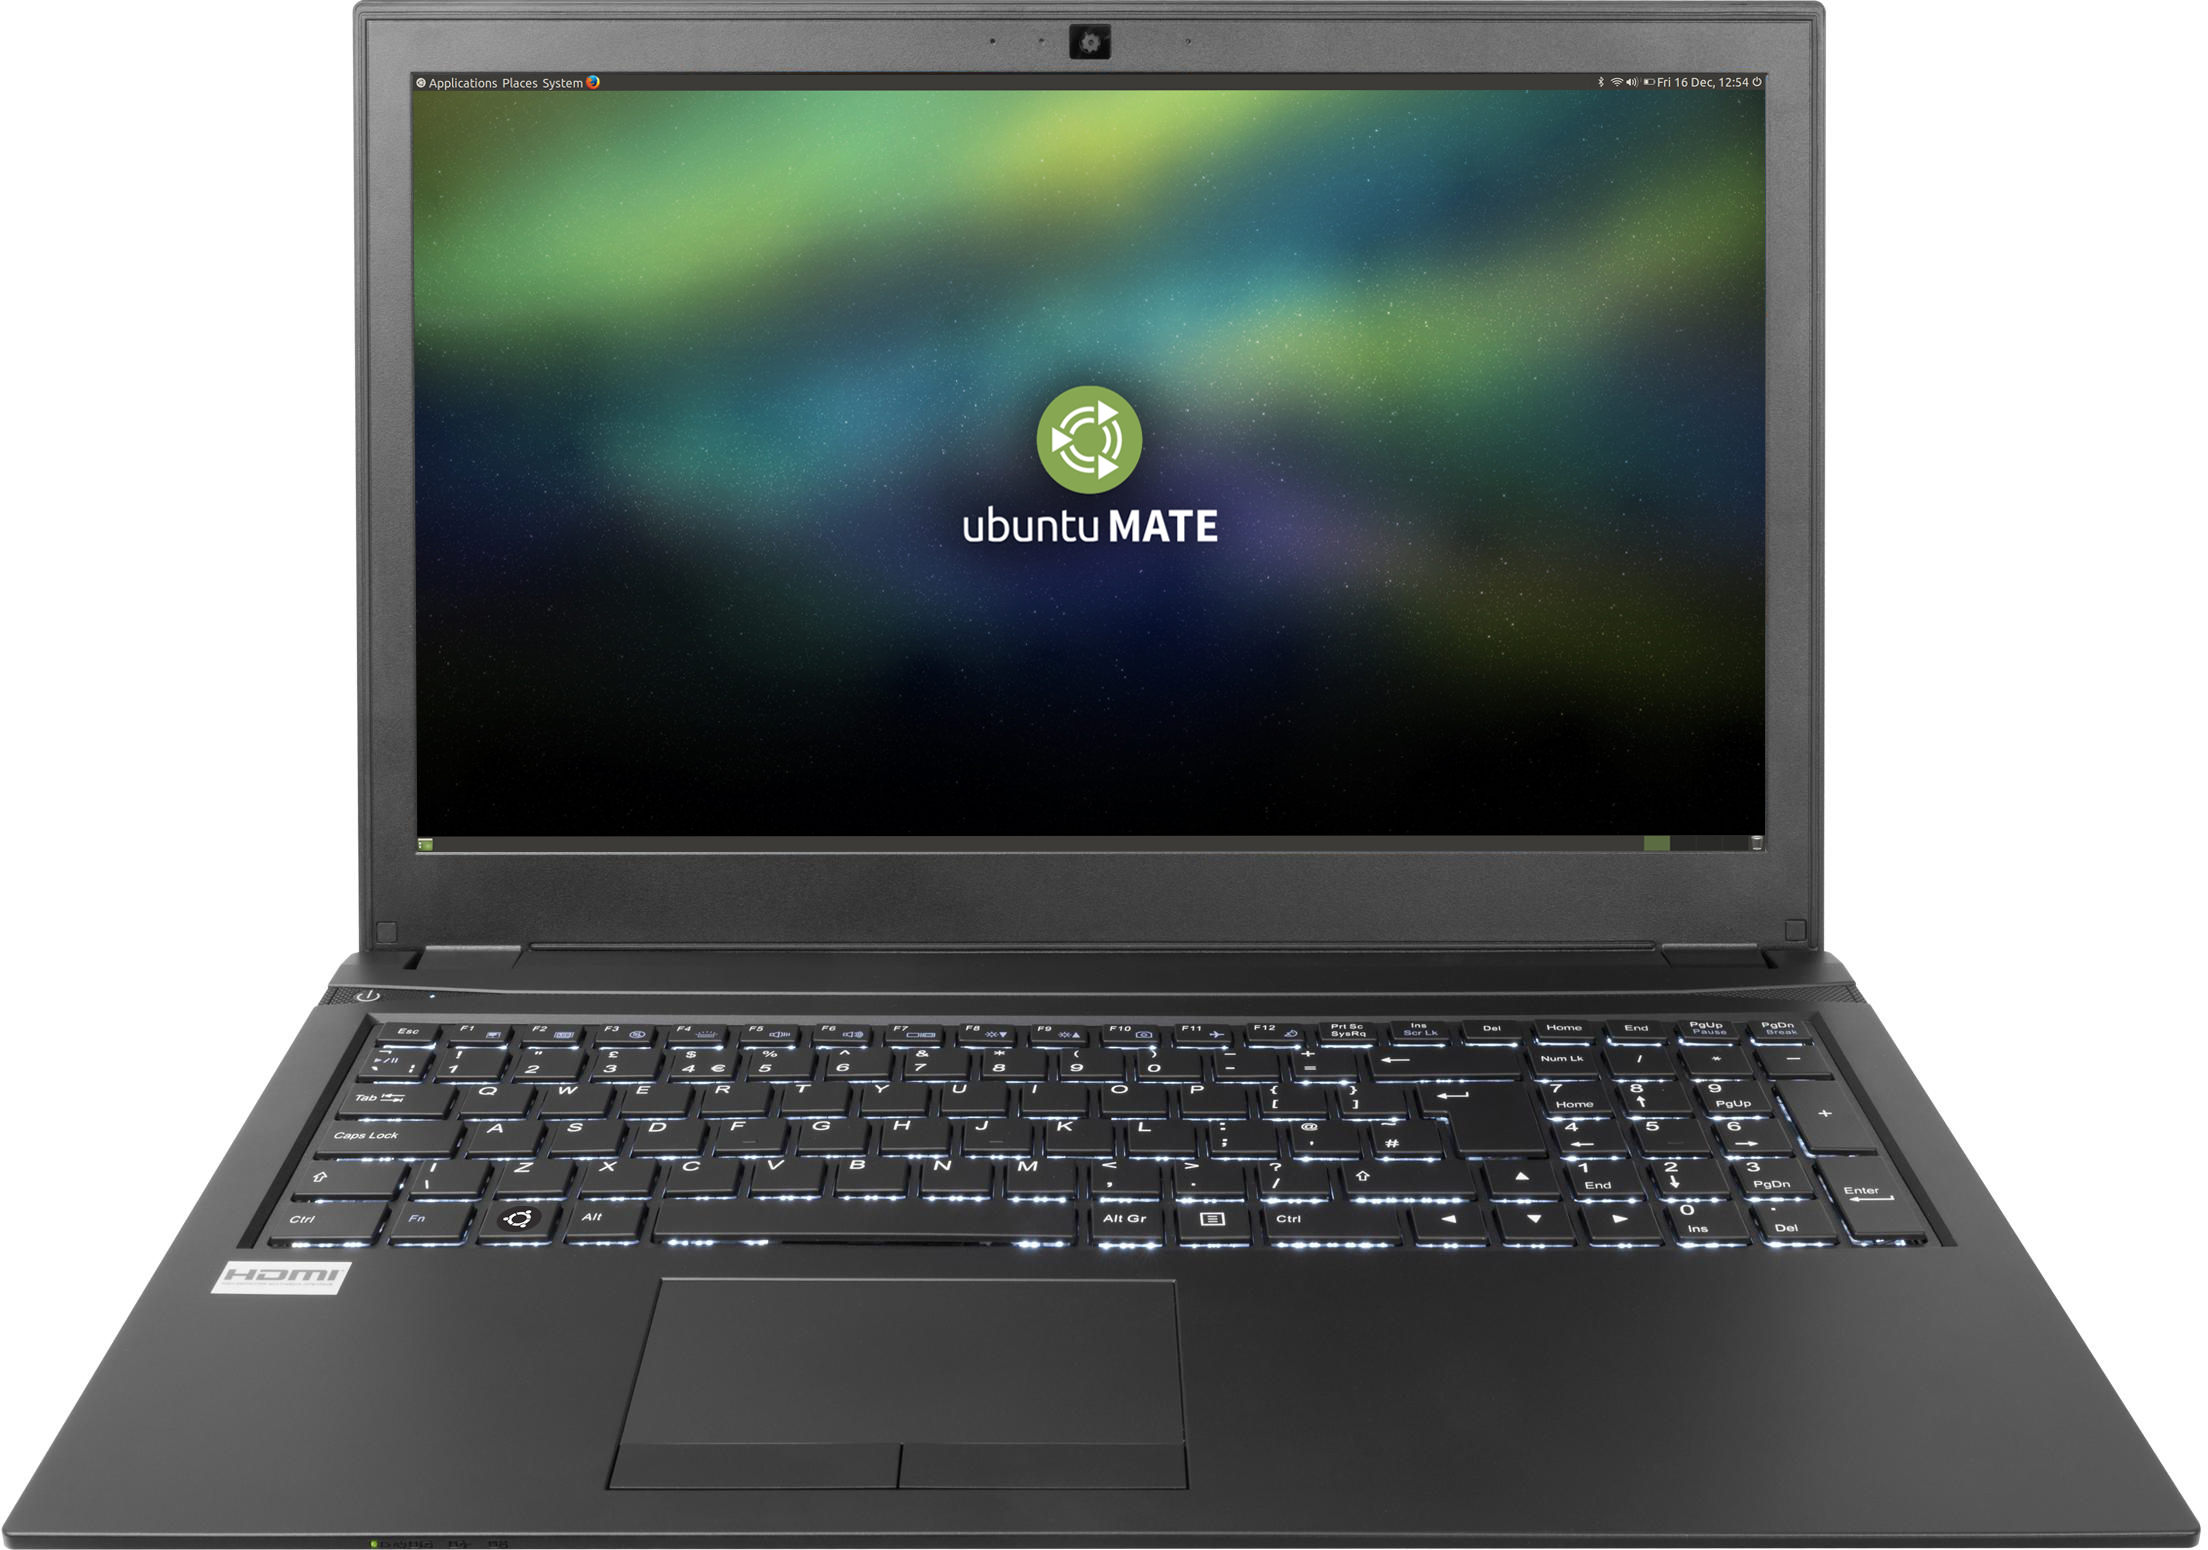 Entreoware Aether Laptop with MATE